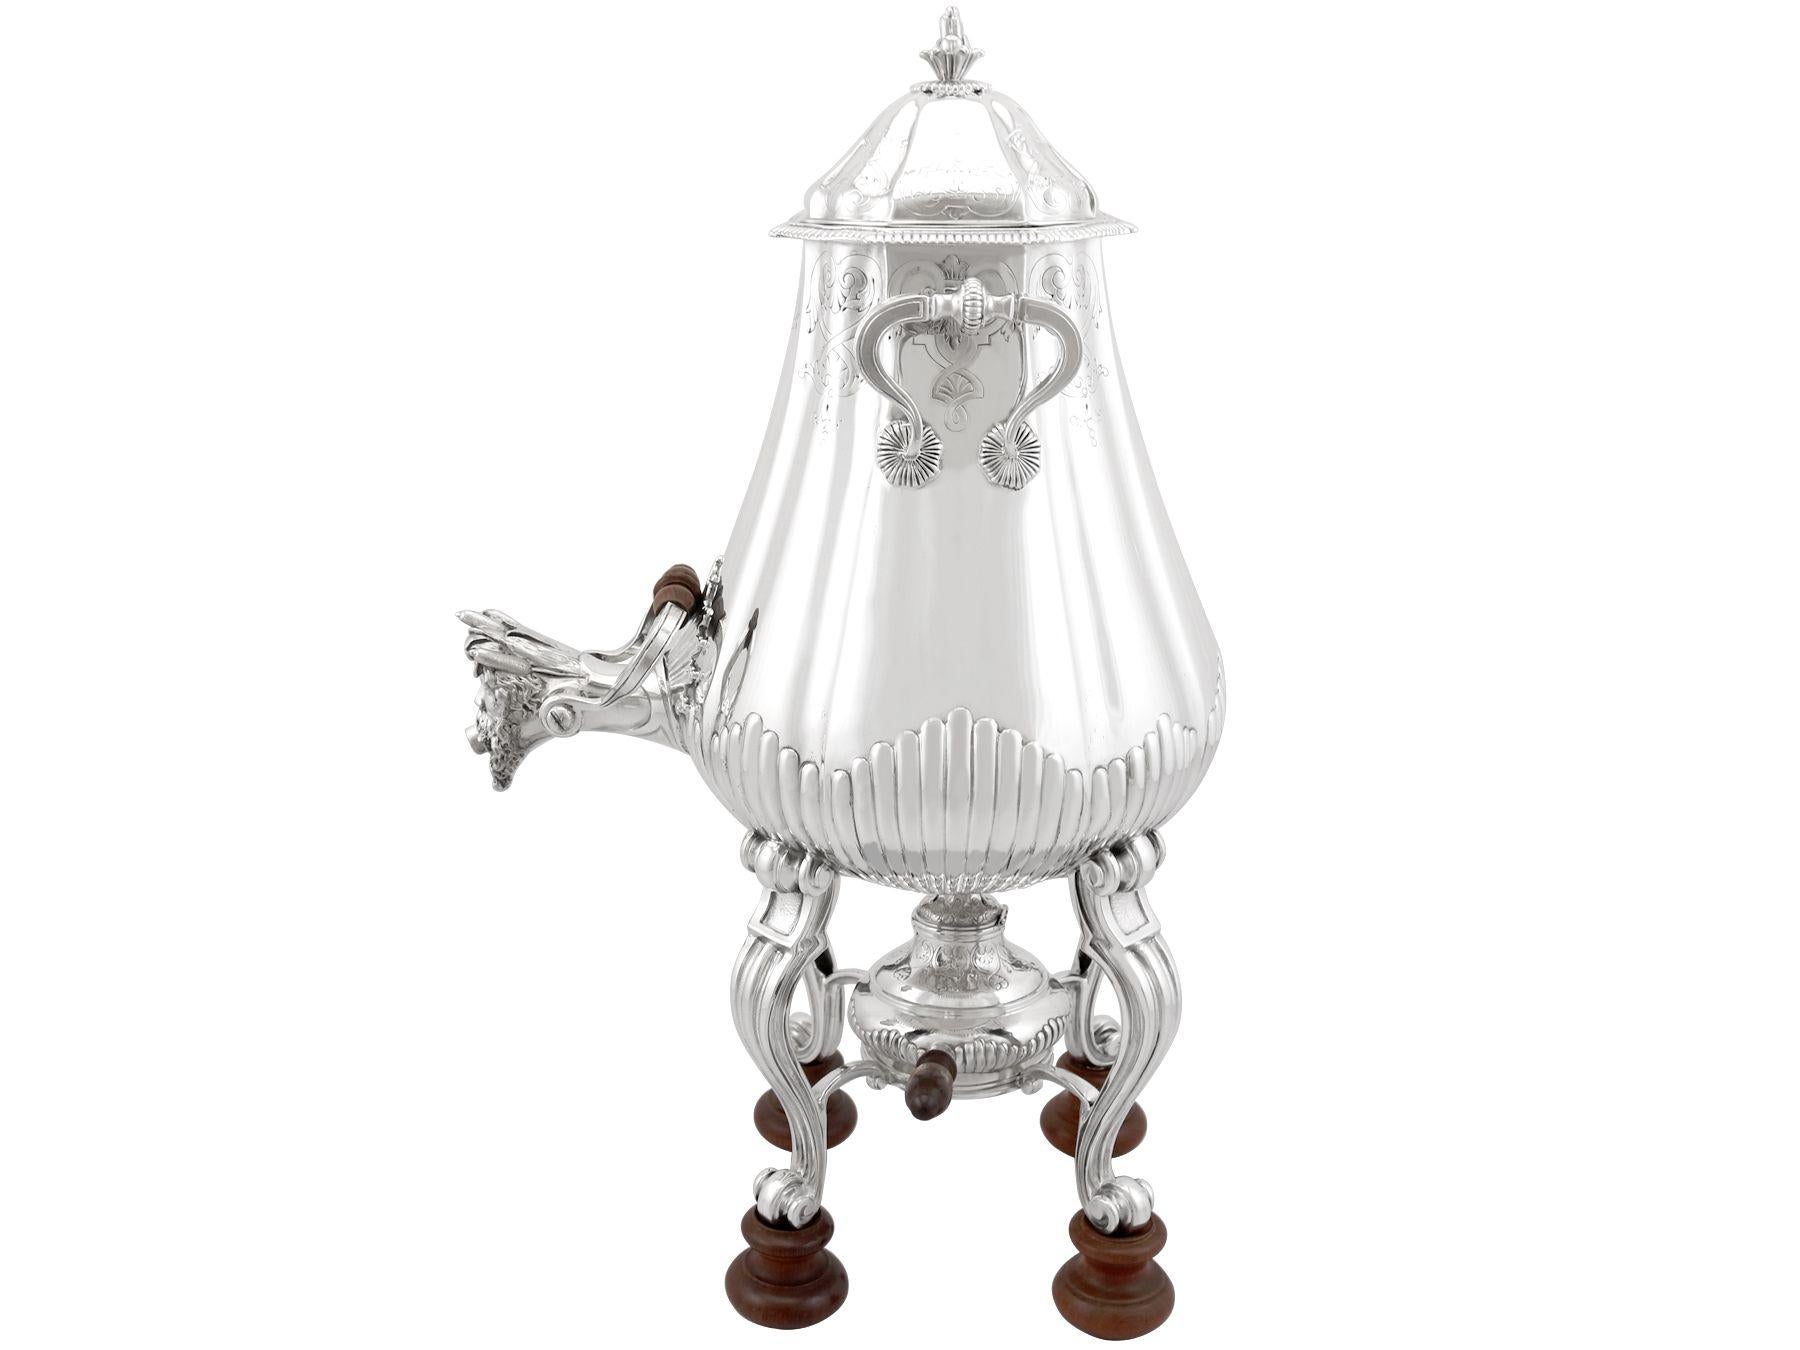 An exceptional, fine and impressive antique French silver samovar; an addition to our antique silver teaware collection.

This exceptional antique French silver samovar has a rounded square shaped form supported by four scrolling legs to button